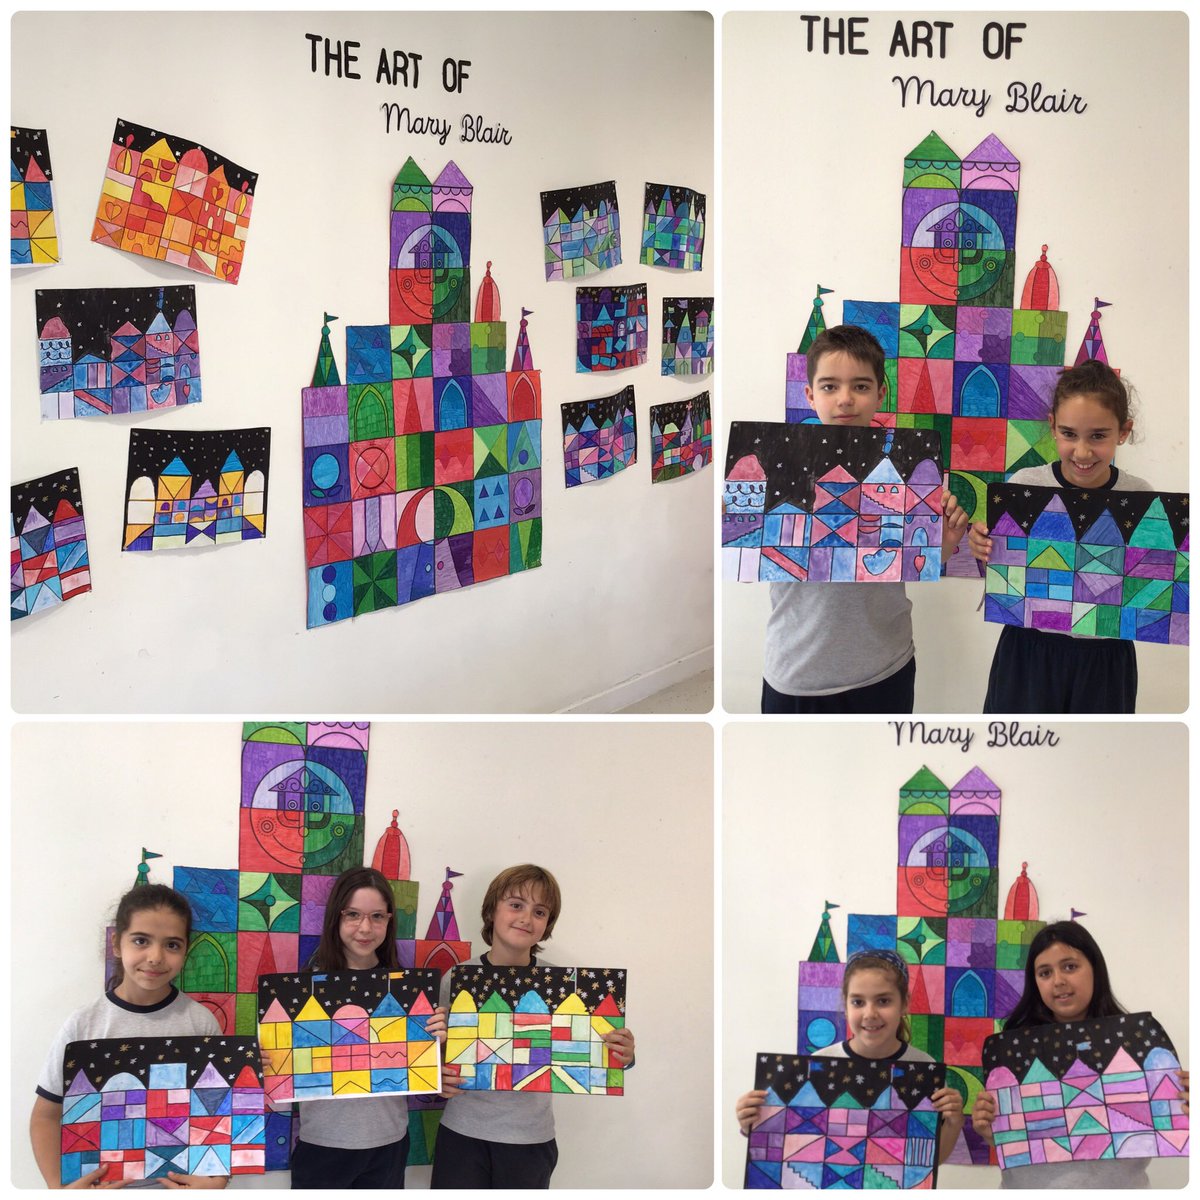 The Art of Mary Blair! 

#Diver4t #LittleArtists #ArtsandCrafts #MaryBlair